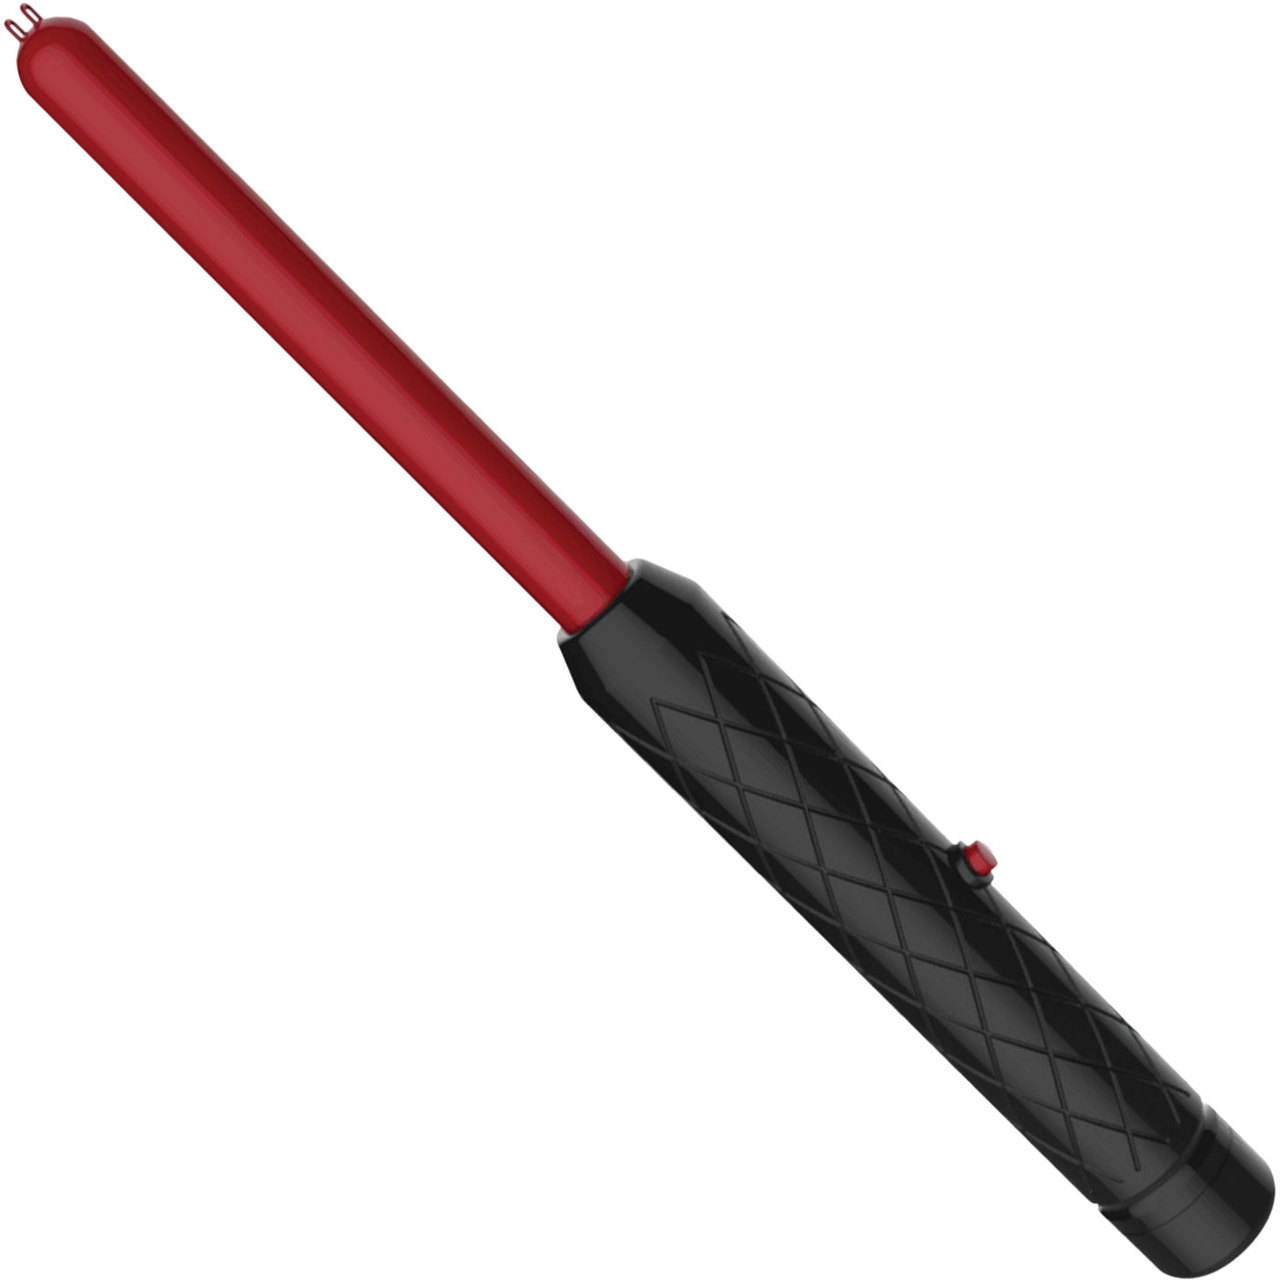 Kink The Stinger Electro-Play Wand